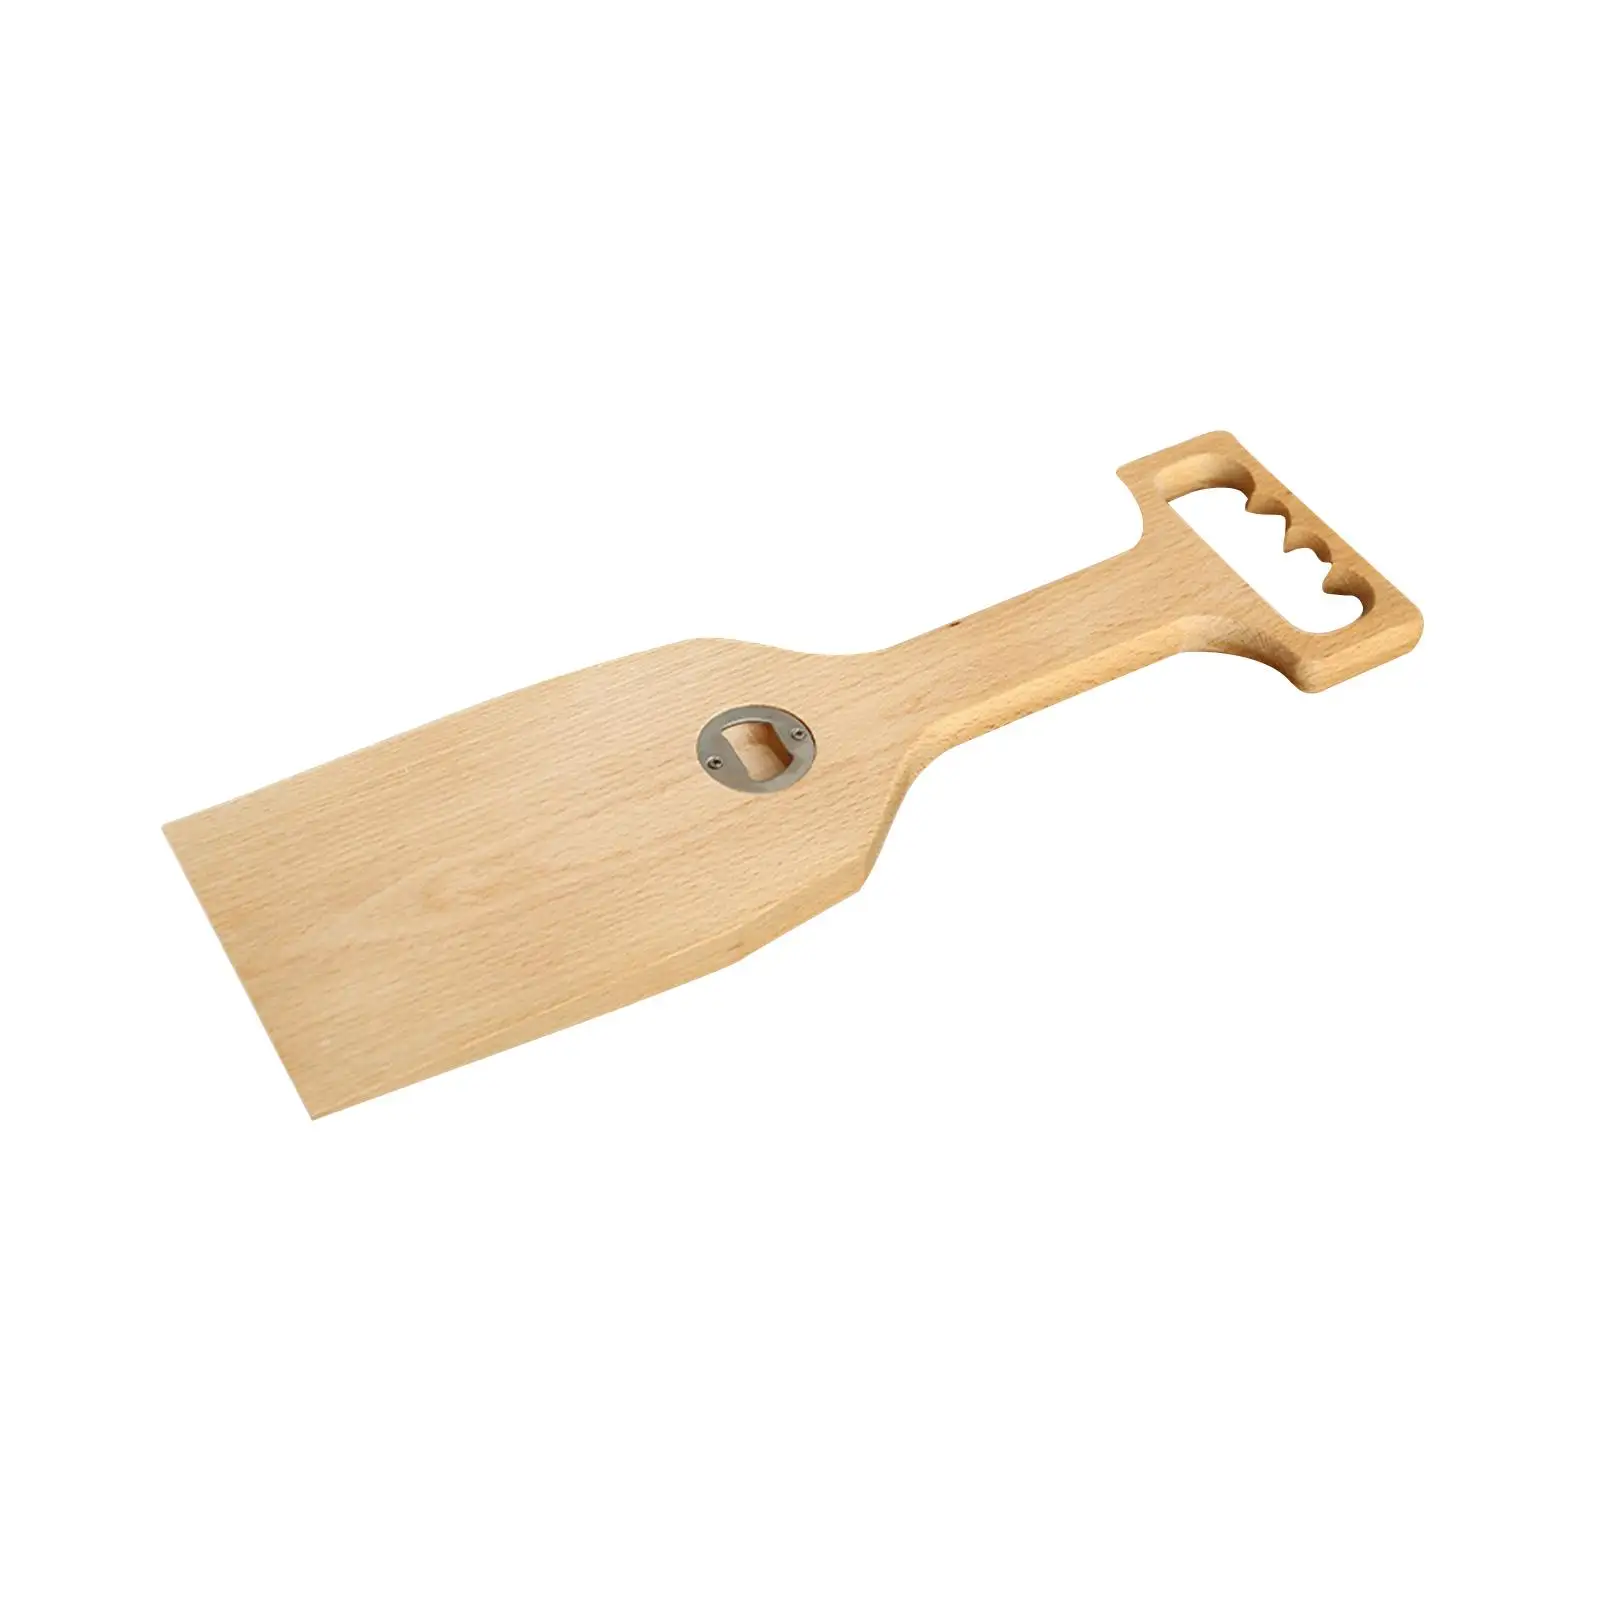 Wood Scraper Shovel Flat Durable Frying Spatula for Serving Cooking Fittings